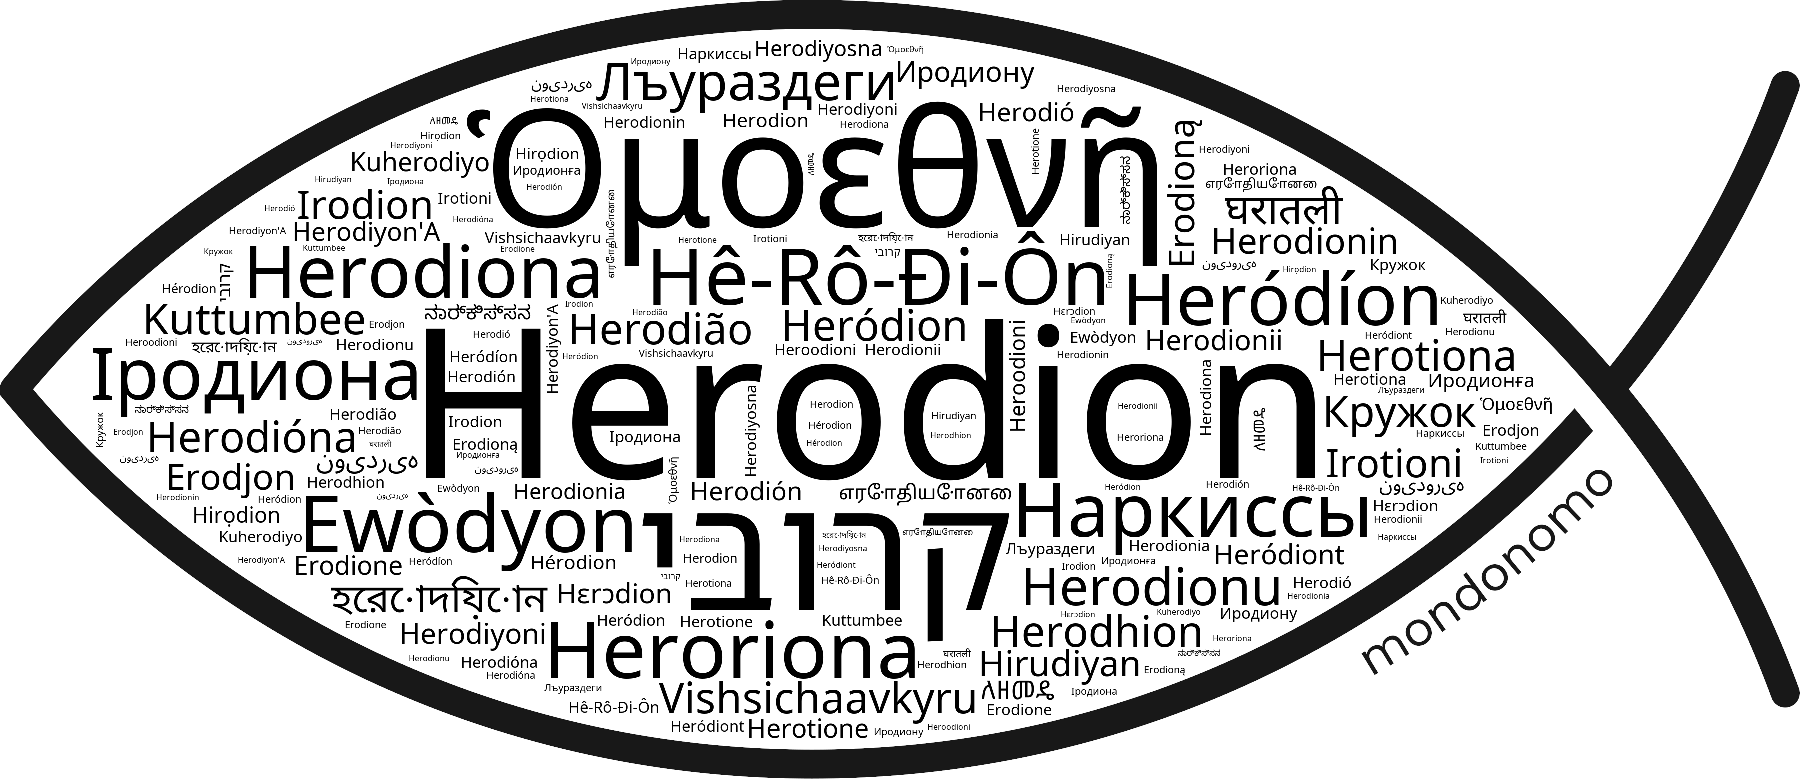 Name Herodion in the world's Bibles